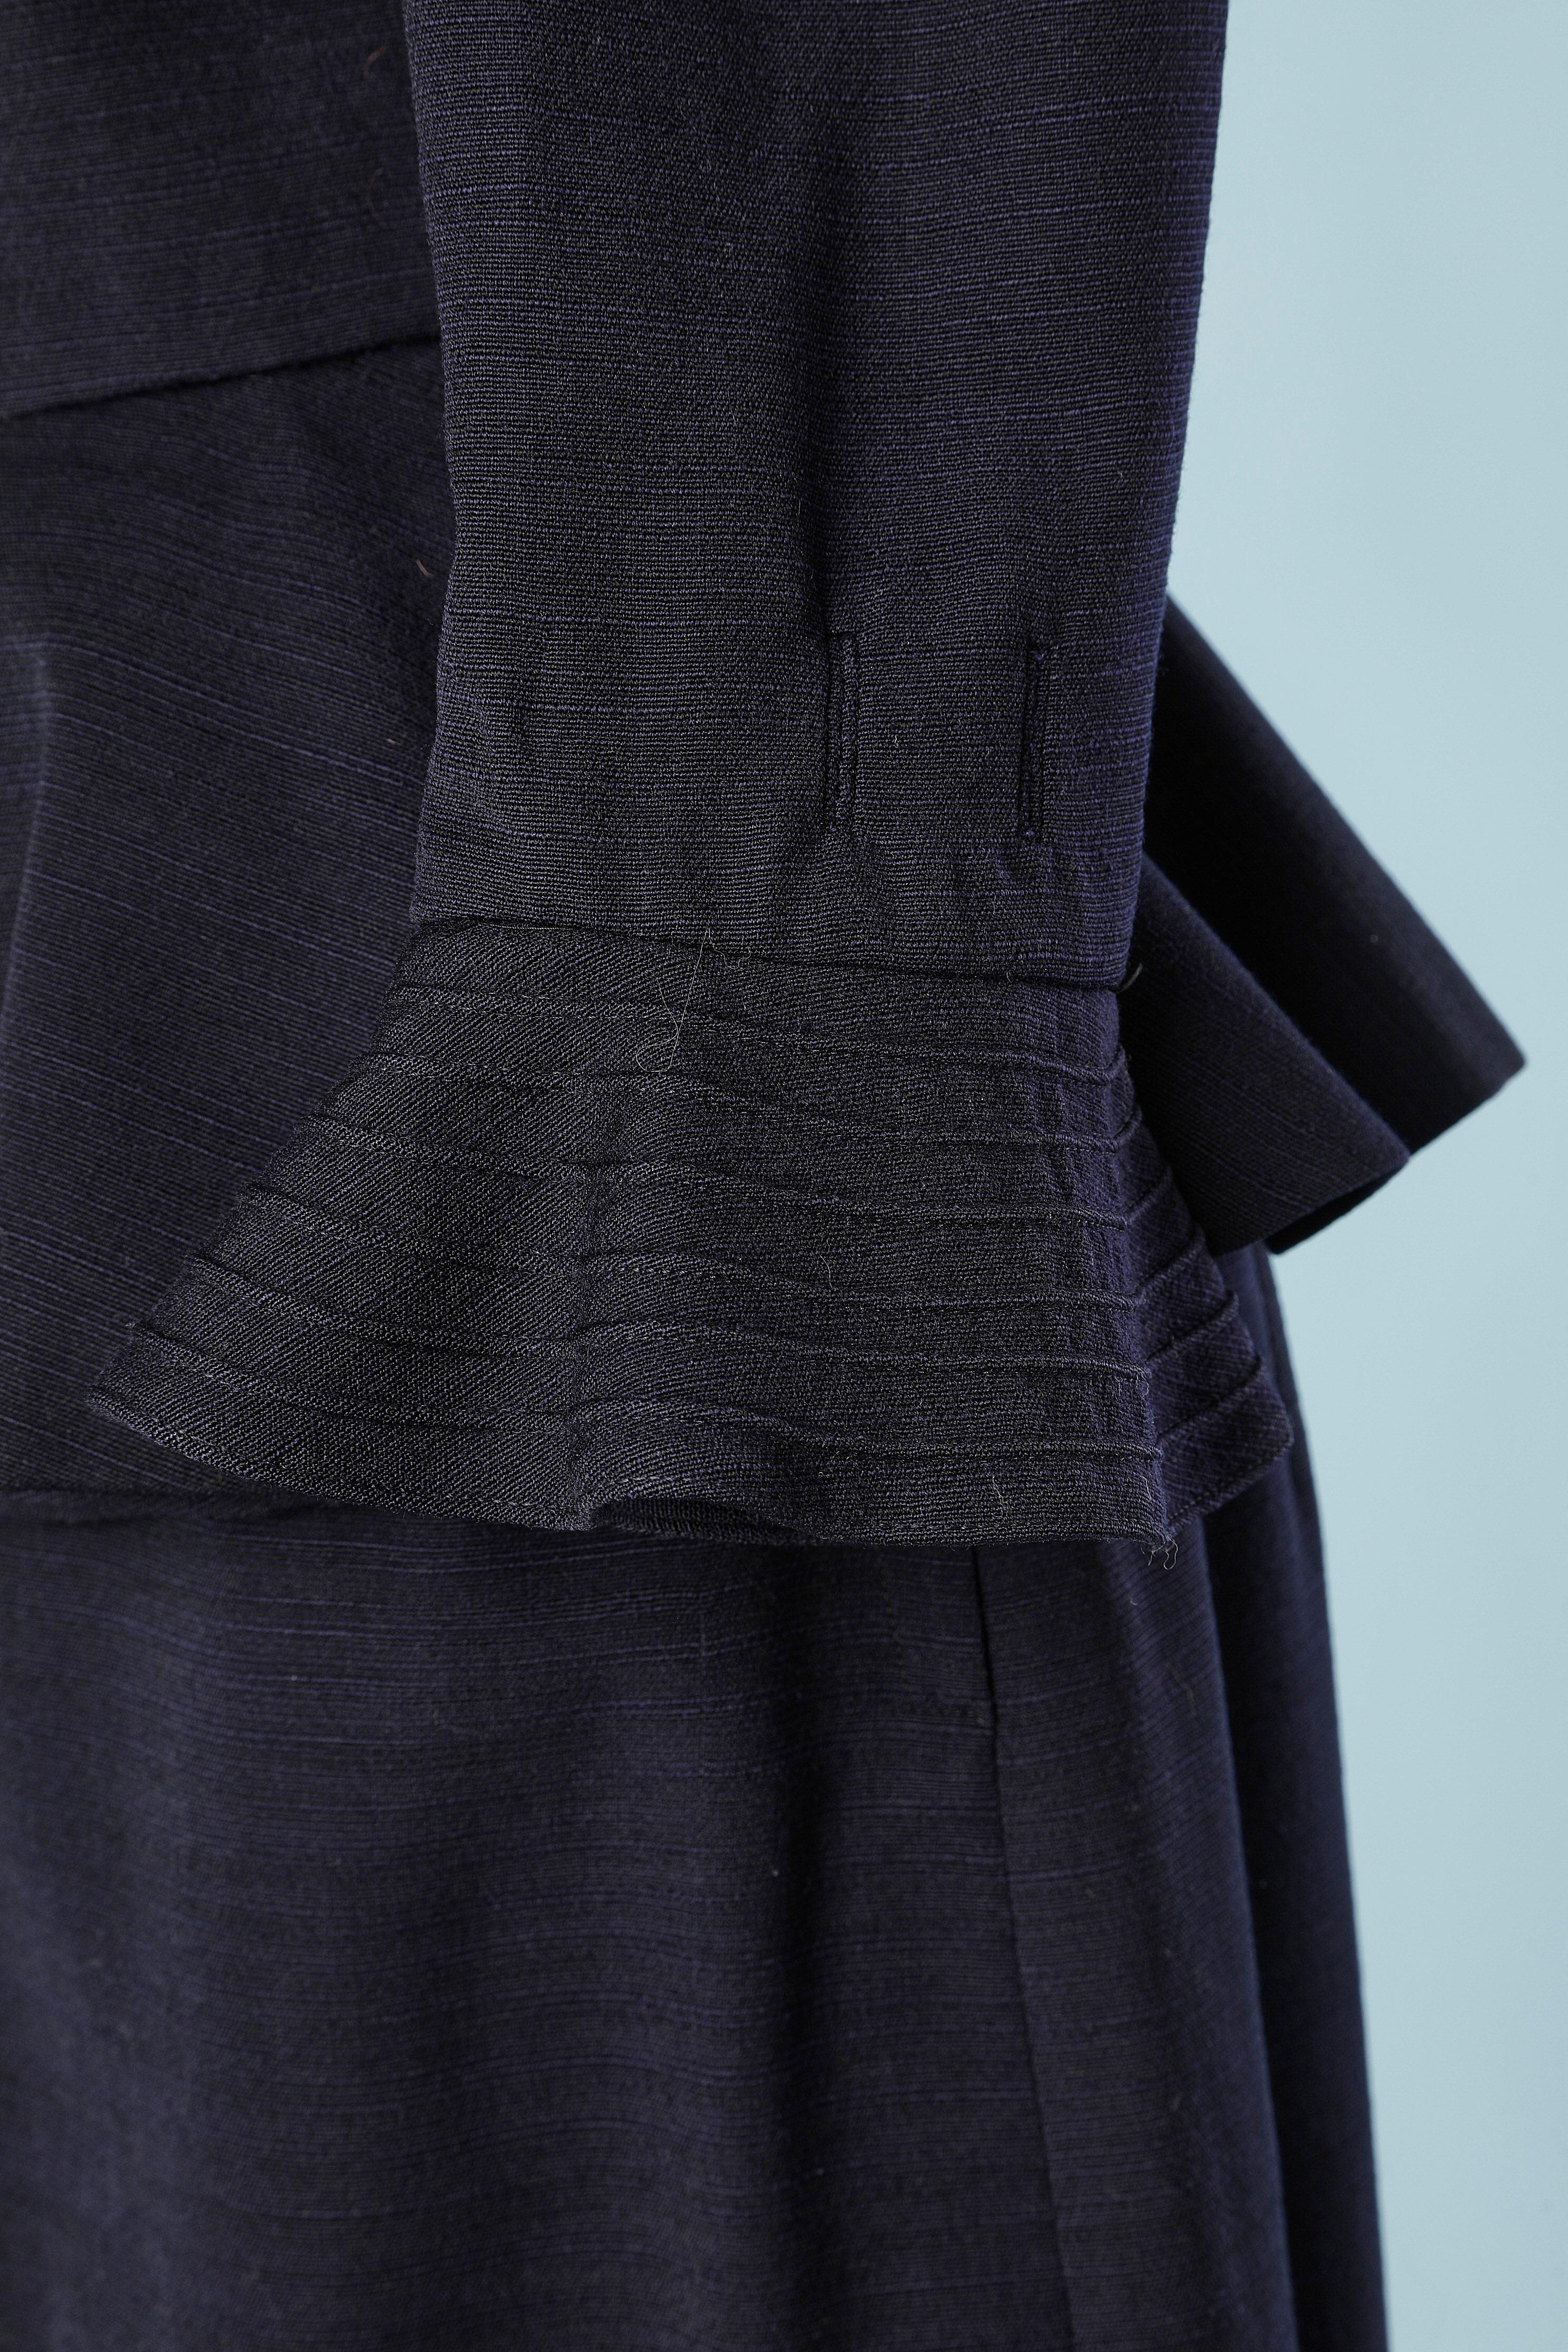 Navy blue wool skirt suit with top-stitching Lilli Ann Circa 1940 In Excellent Condition For Sale In Saint-Ouen-Sur-Seine, FR